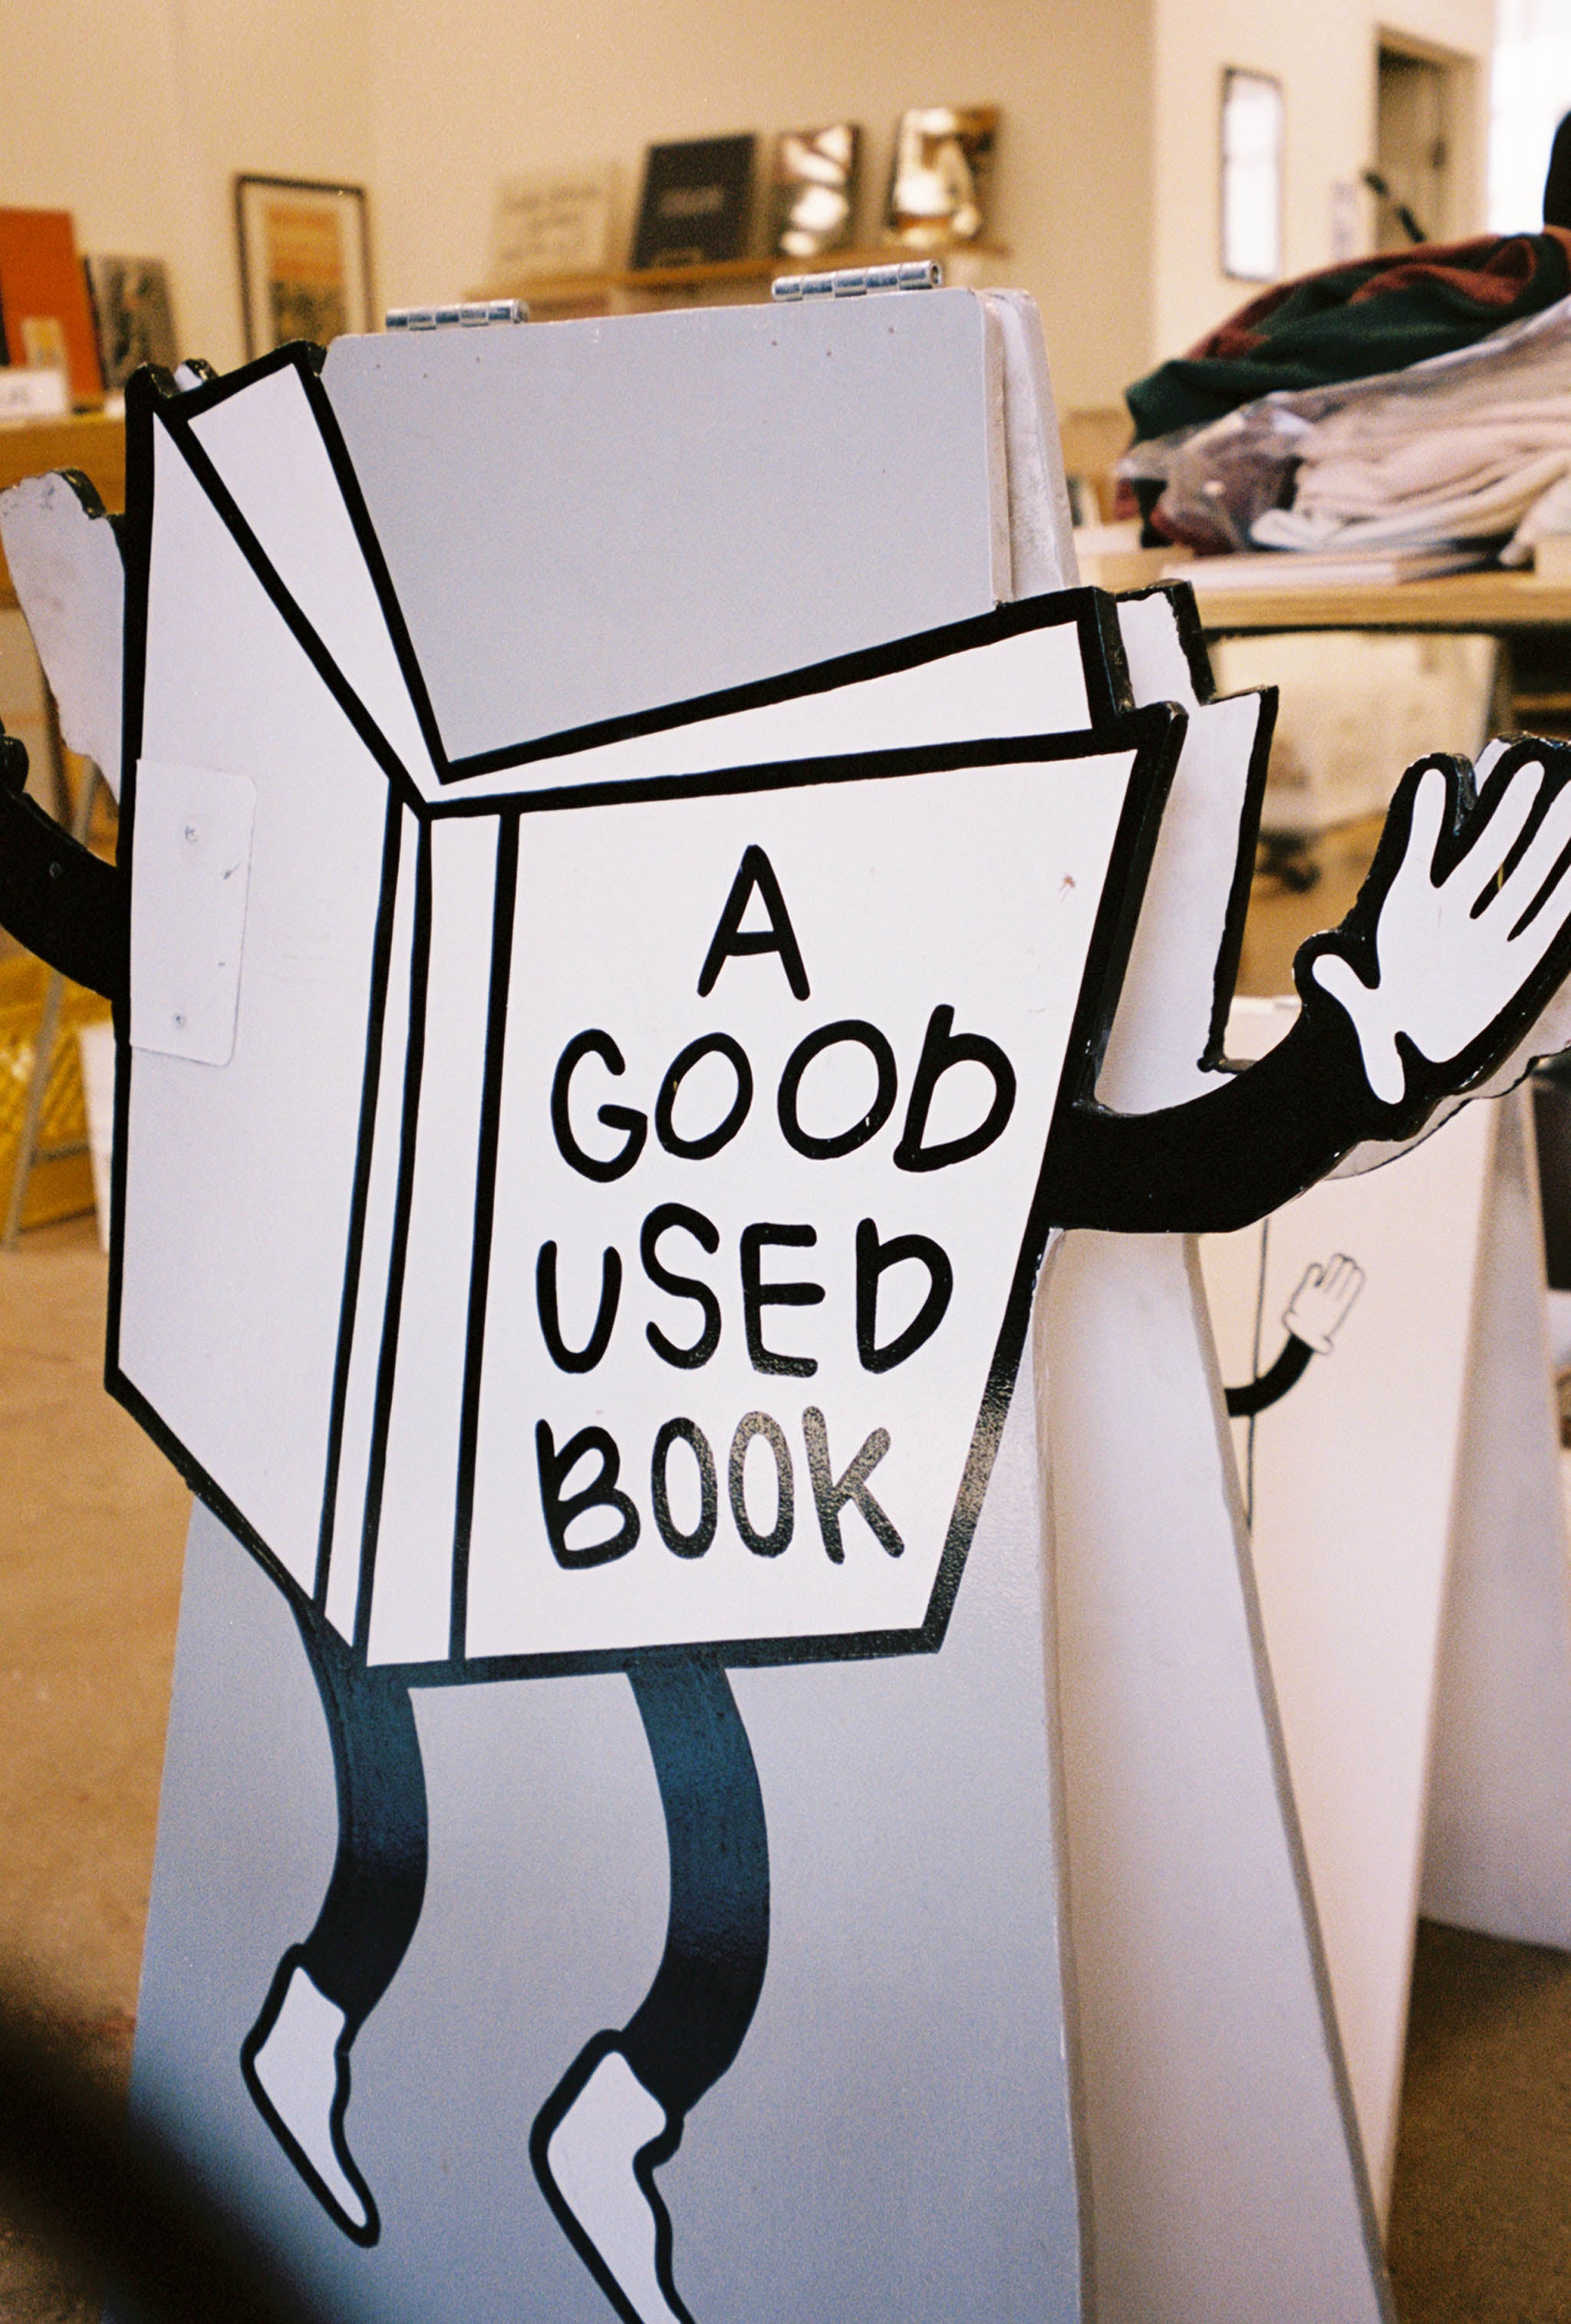 Good Life - Chris & Jenny of A Good Used Book